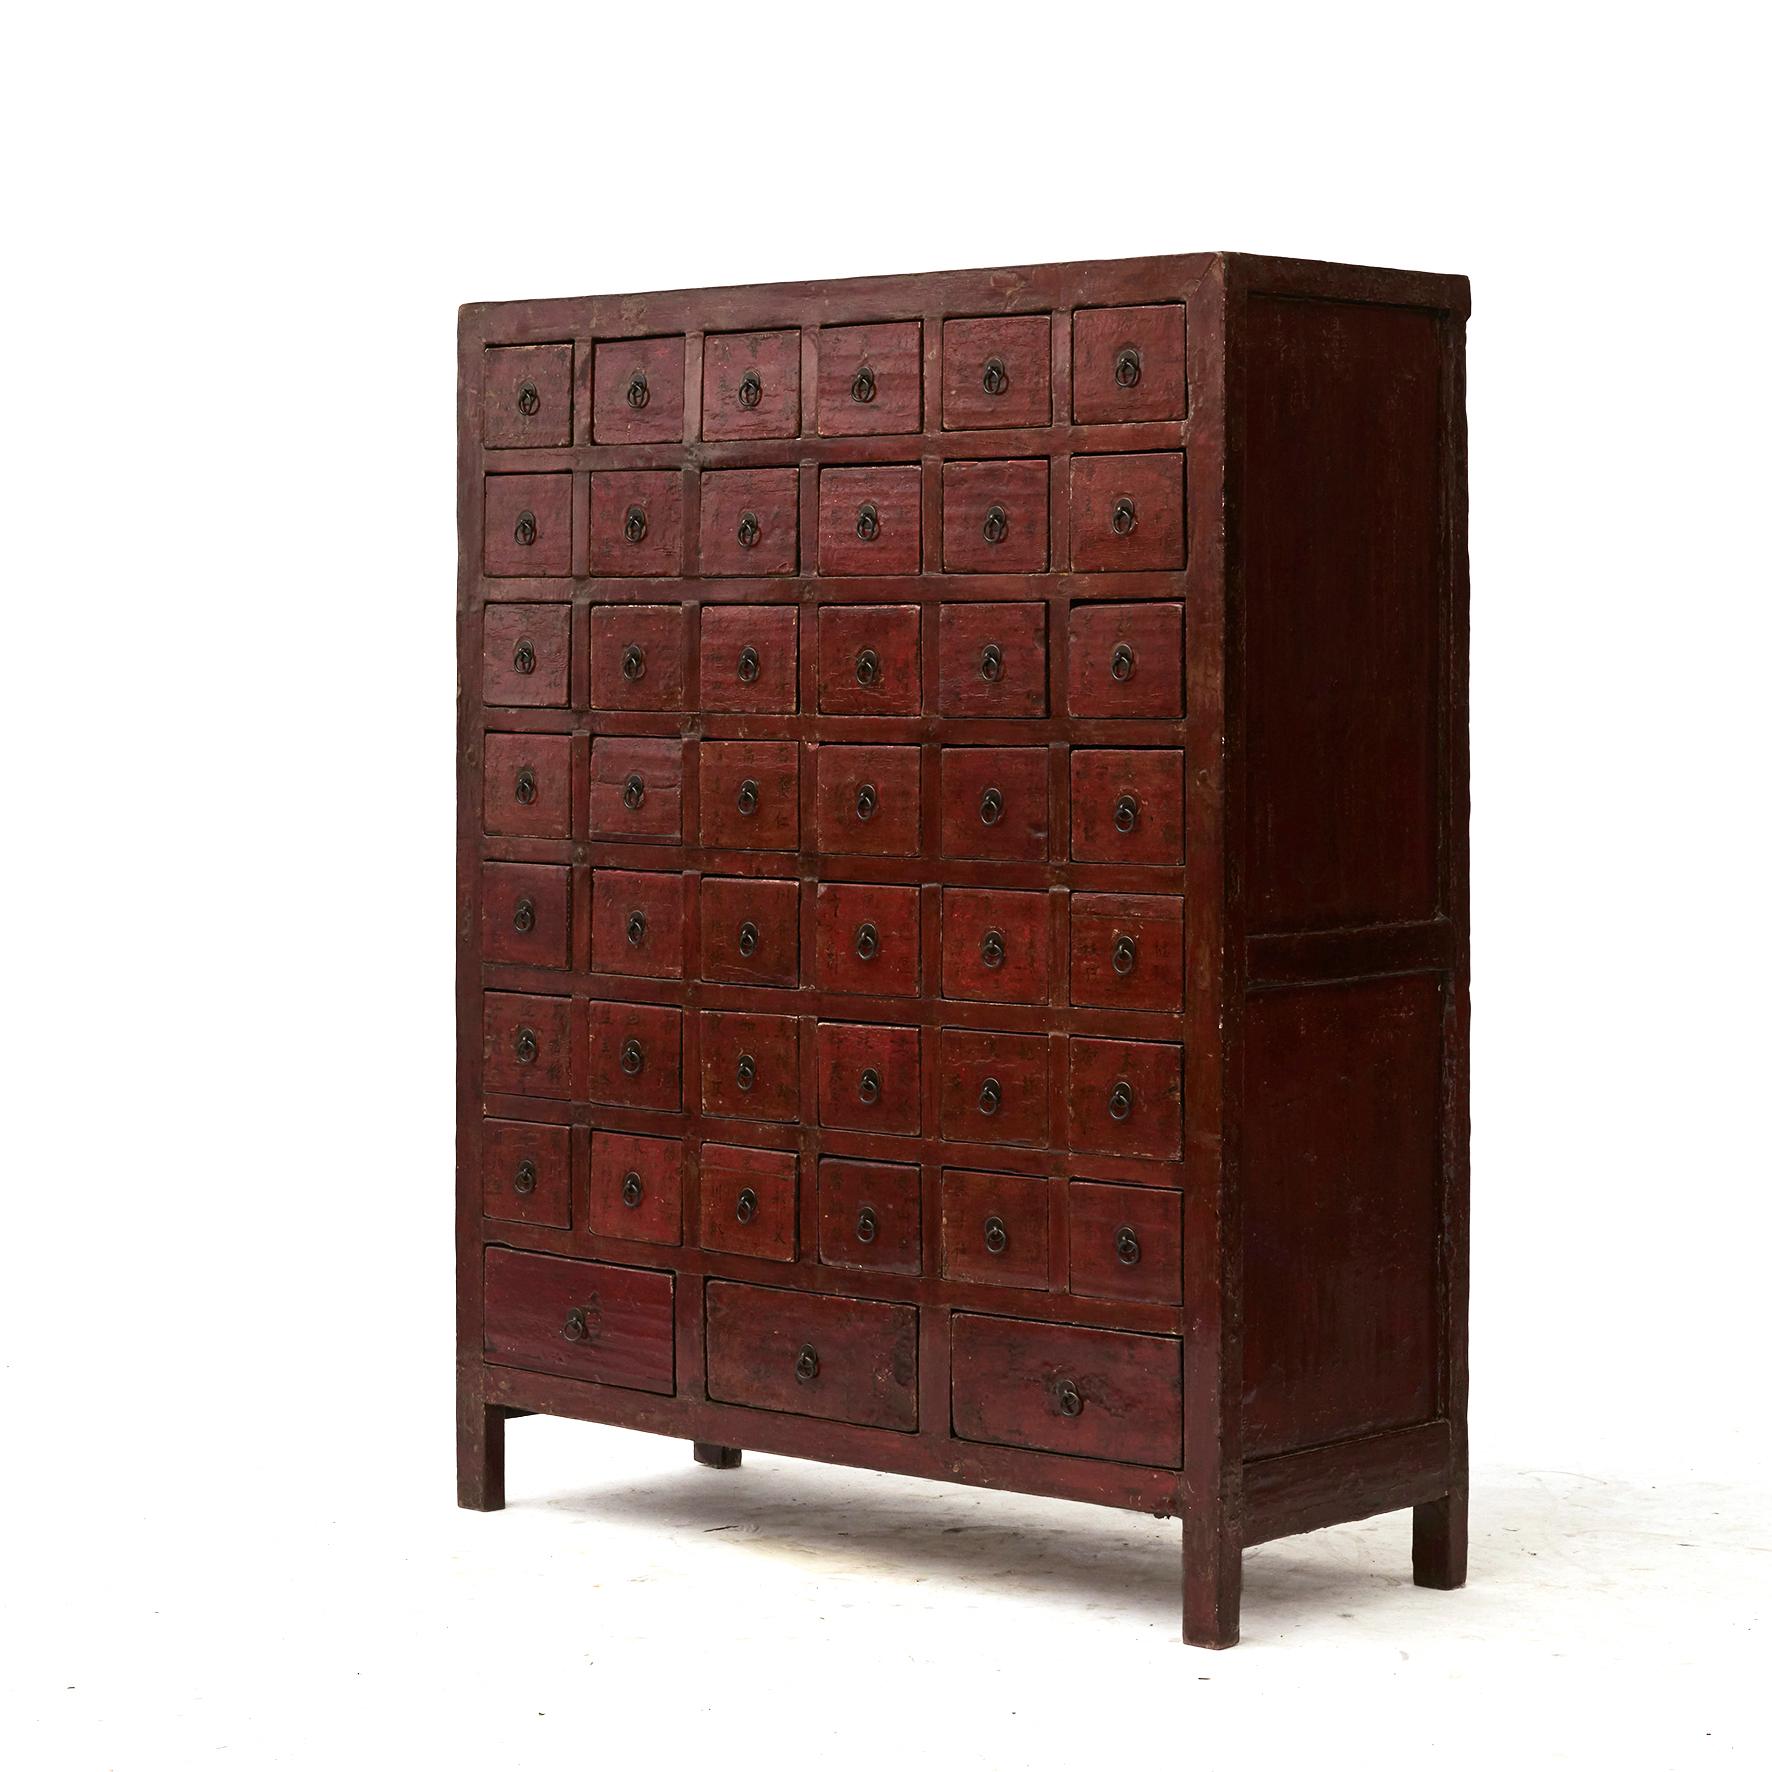 A Chinese Qing Dynasty apothecary / pharmacy medicine chest.
Front in original red lacquer with 45 drawers (42 small drawers + 3 larger drawers at the bottom).
Each drawer with hand written Chinese calligraphy in black lacquer. These were used to